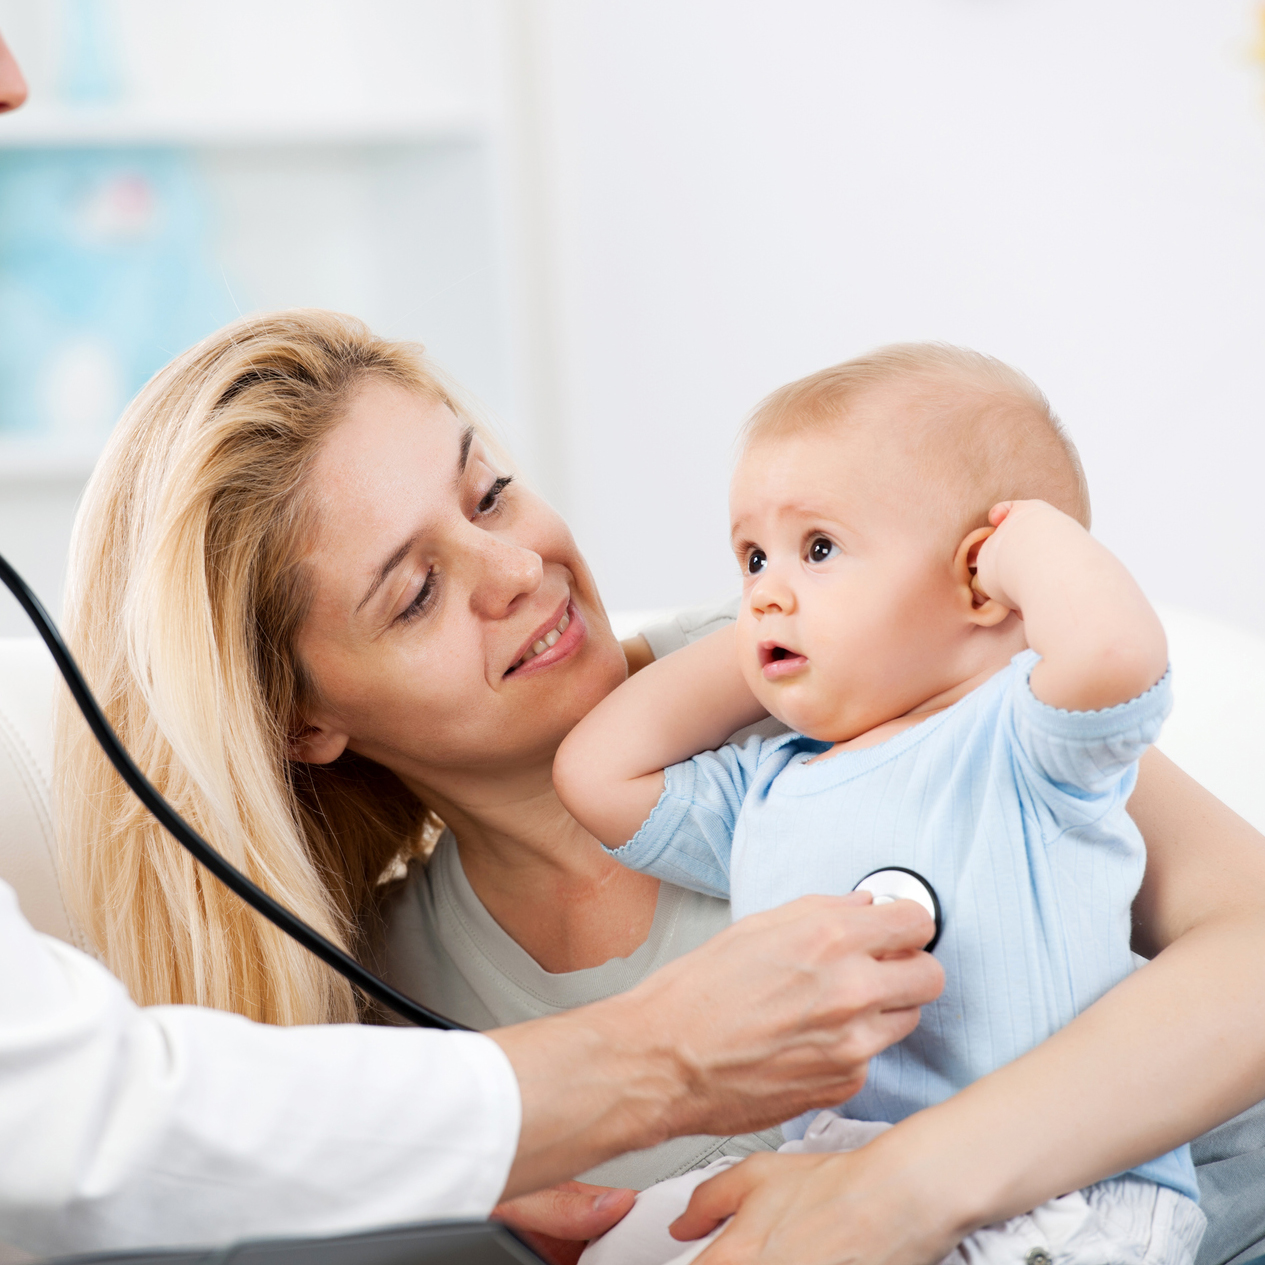 Parent holding infant during physical examination